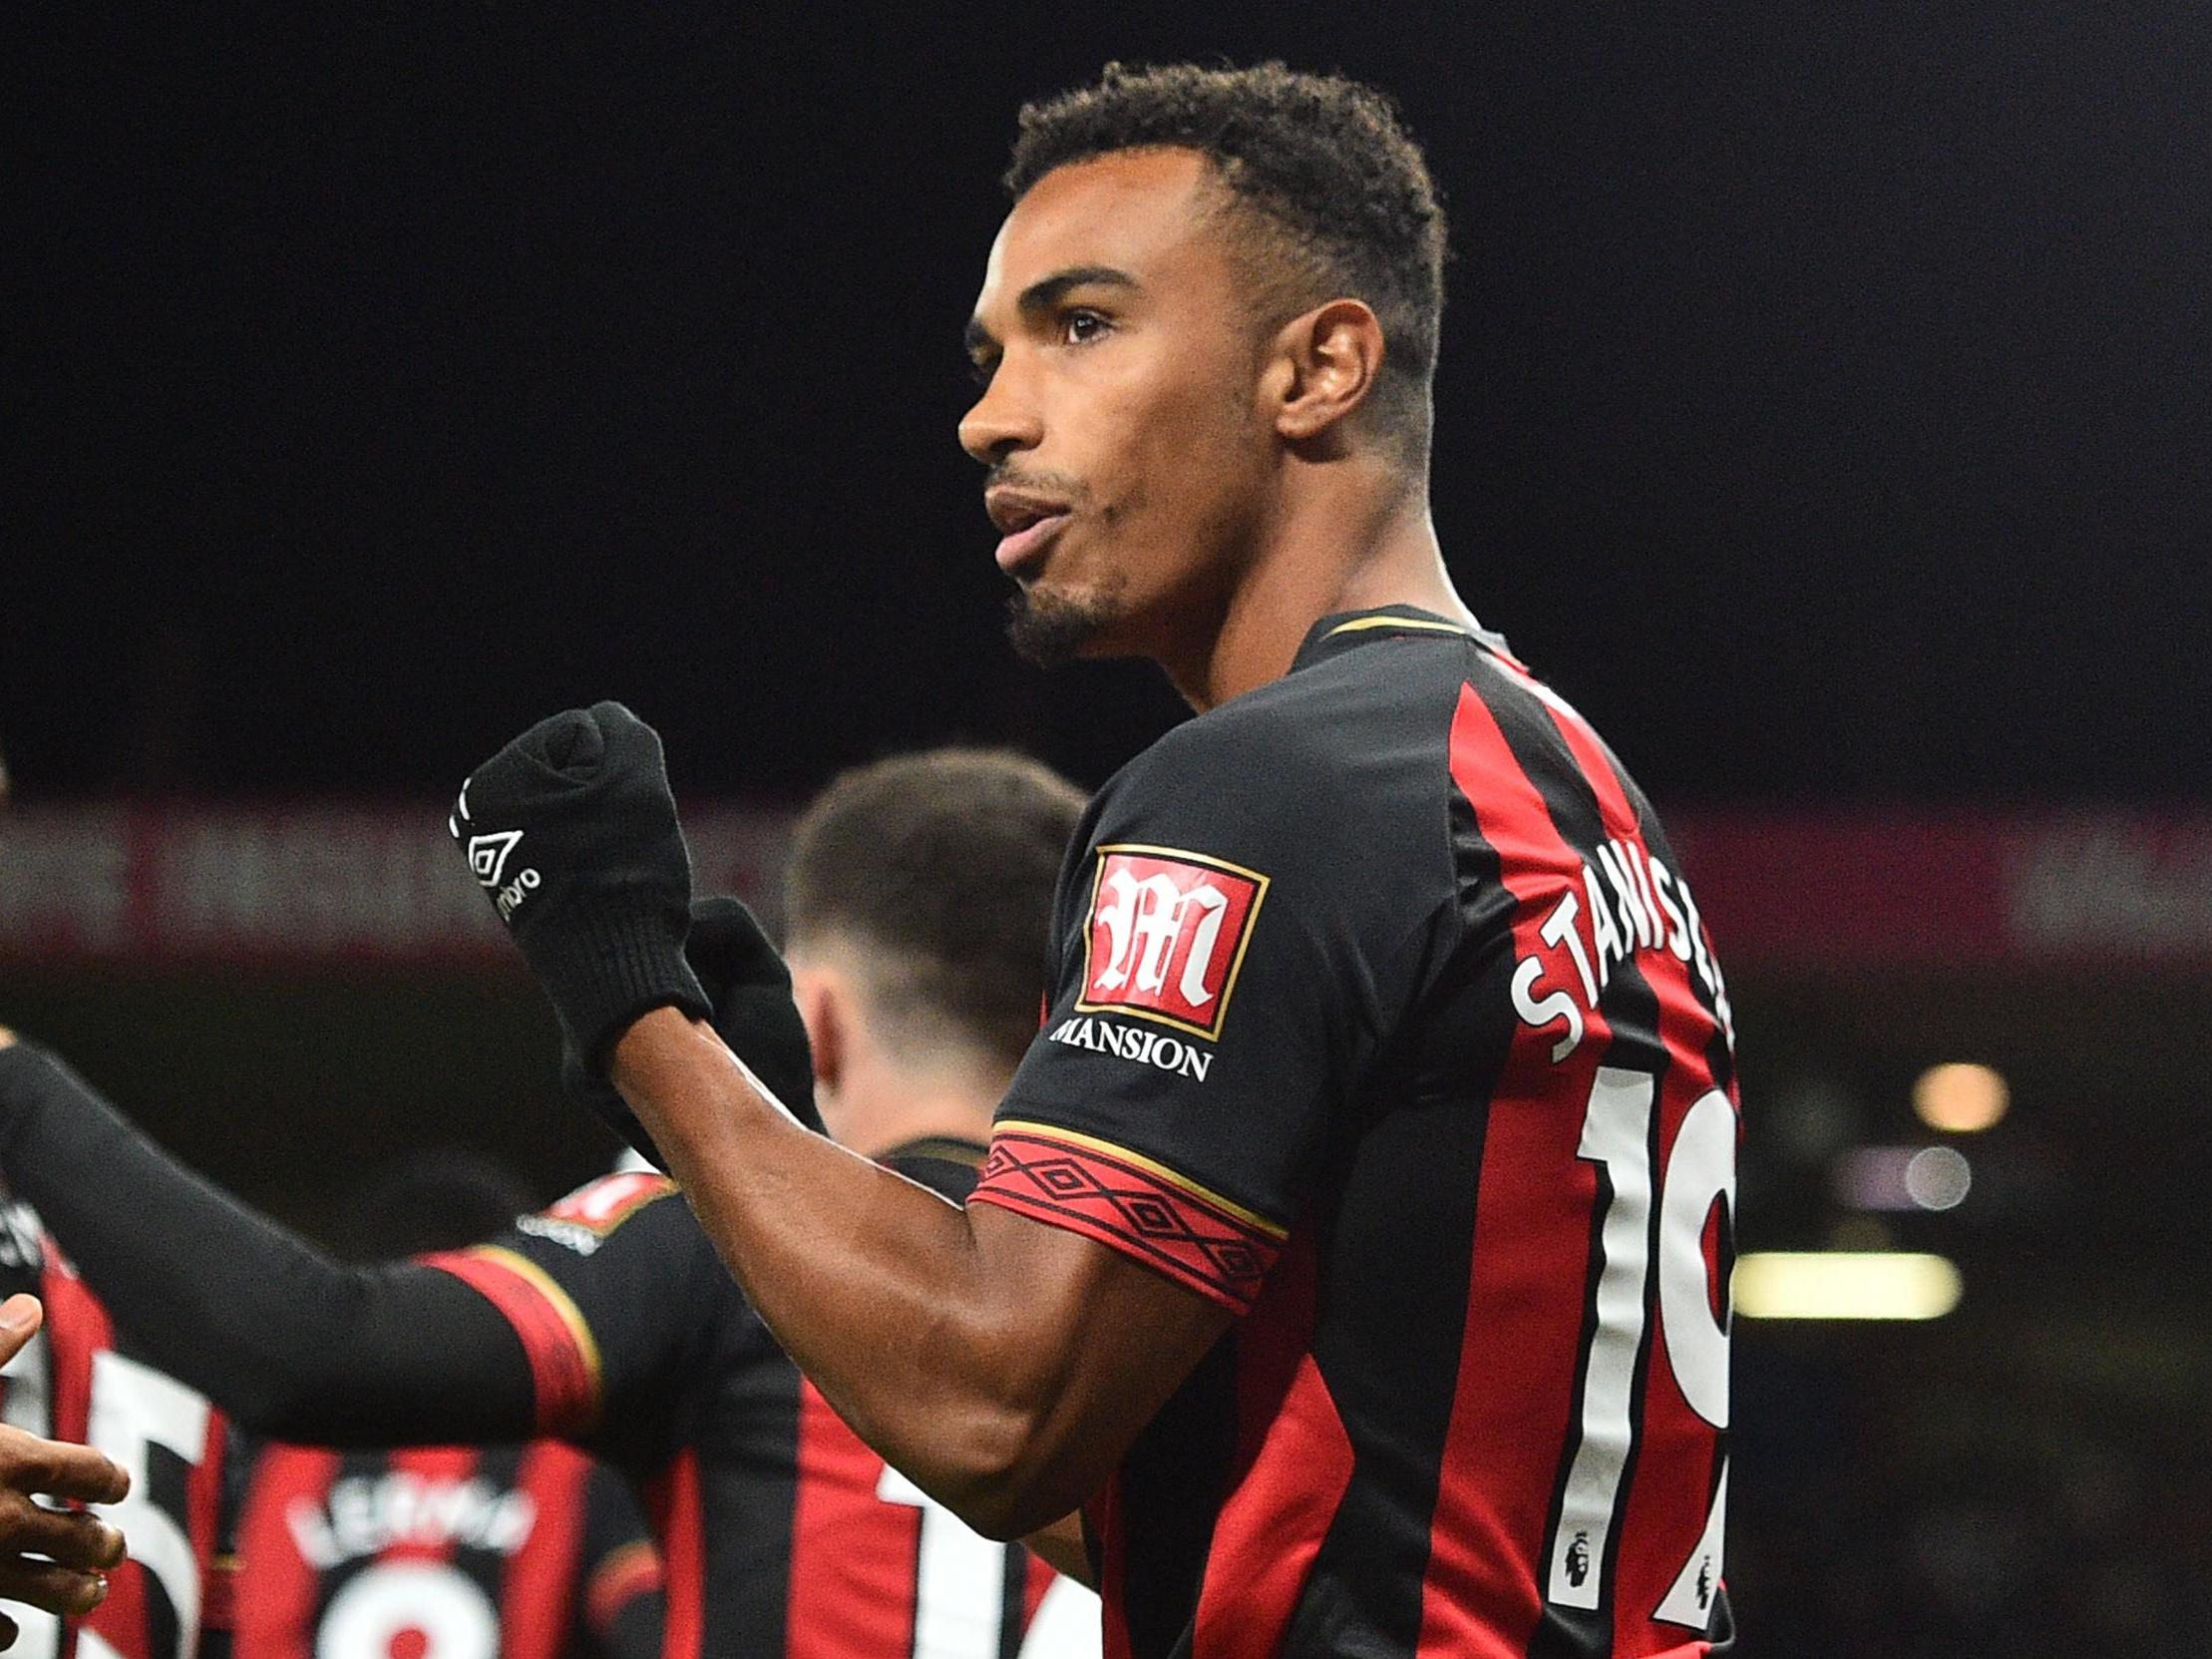 Bournemouth resilience rewarded as Junior Stanislas hits winning penalty against Crystal Palace